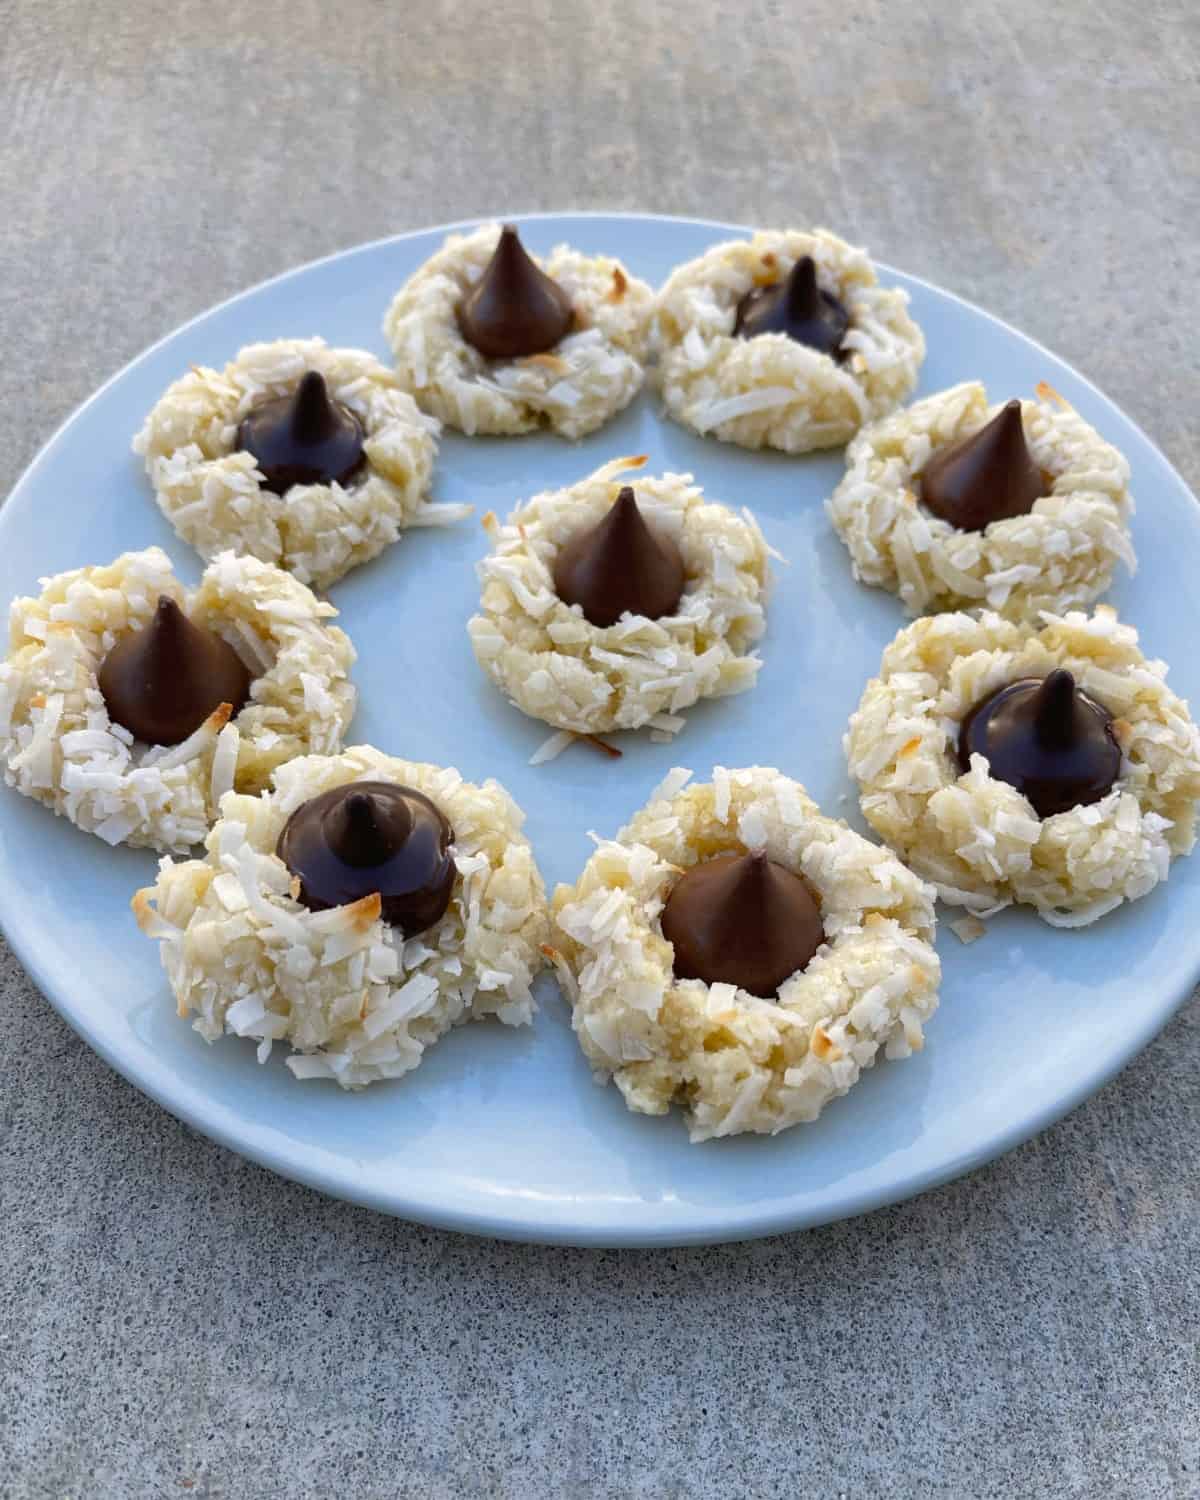 Fresh baked coconut macaroon kiss cookies on round blue plate.